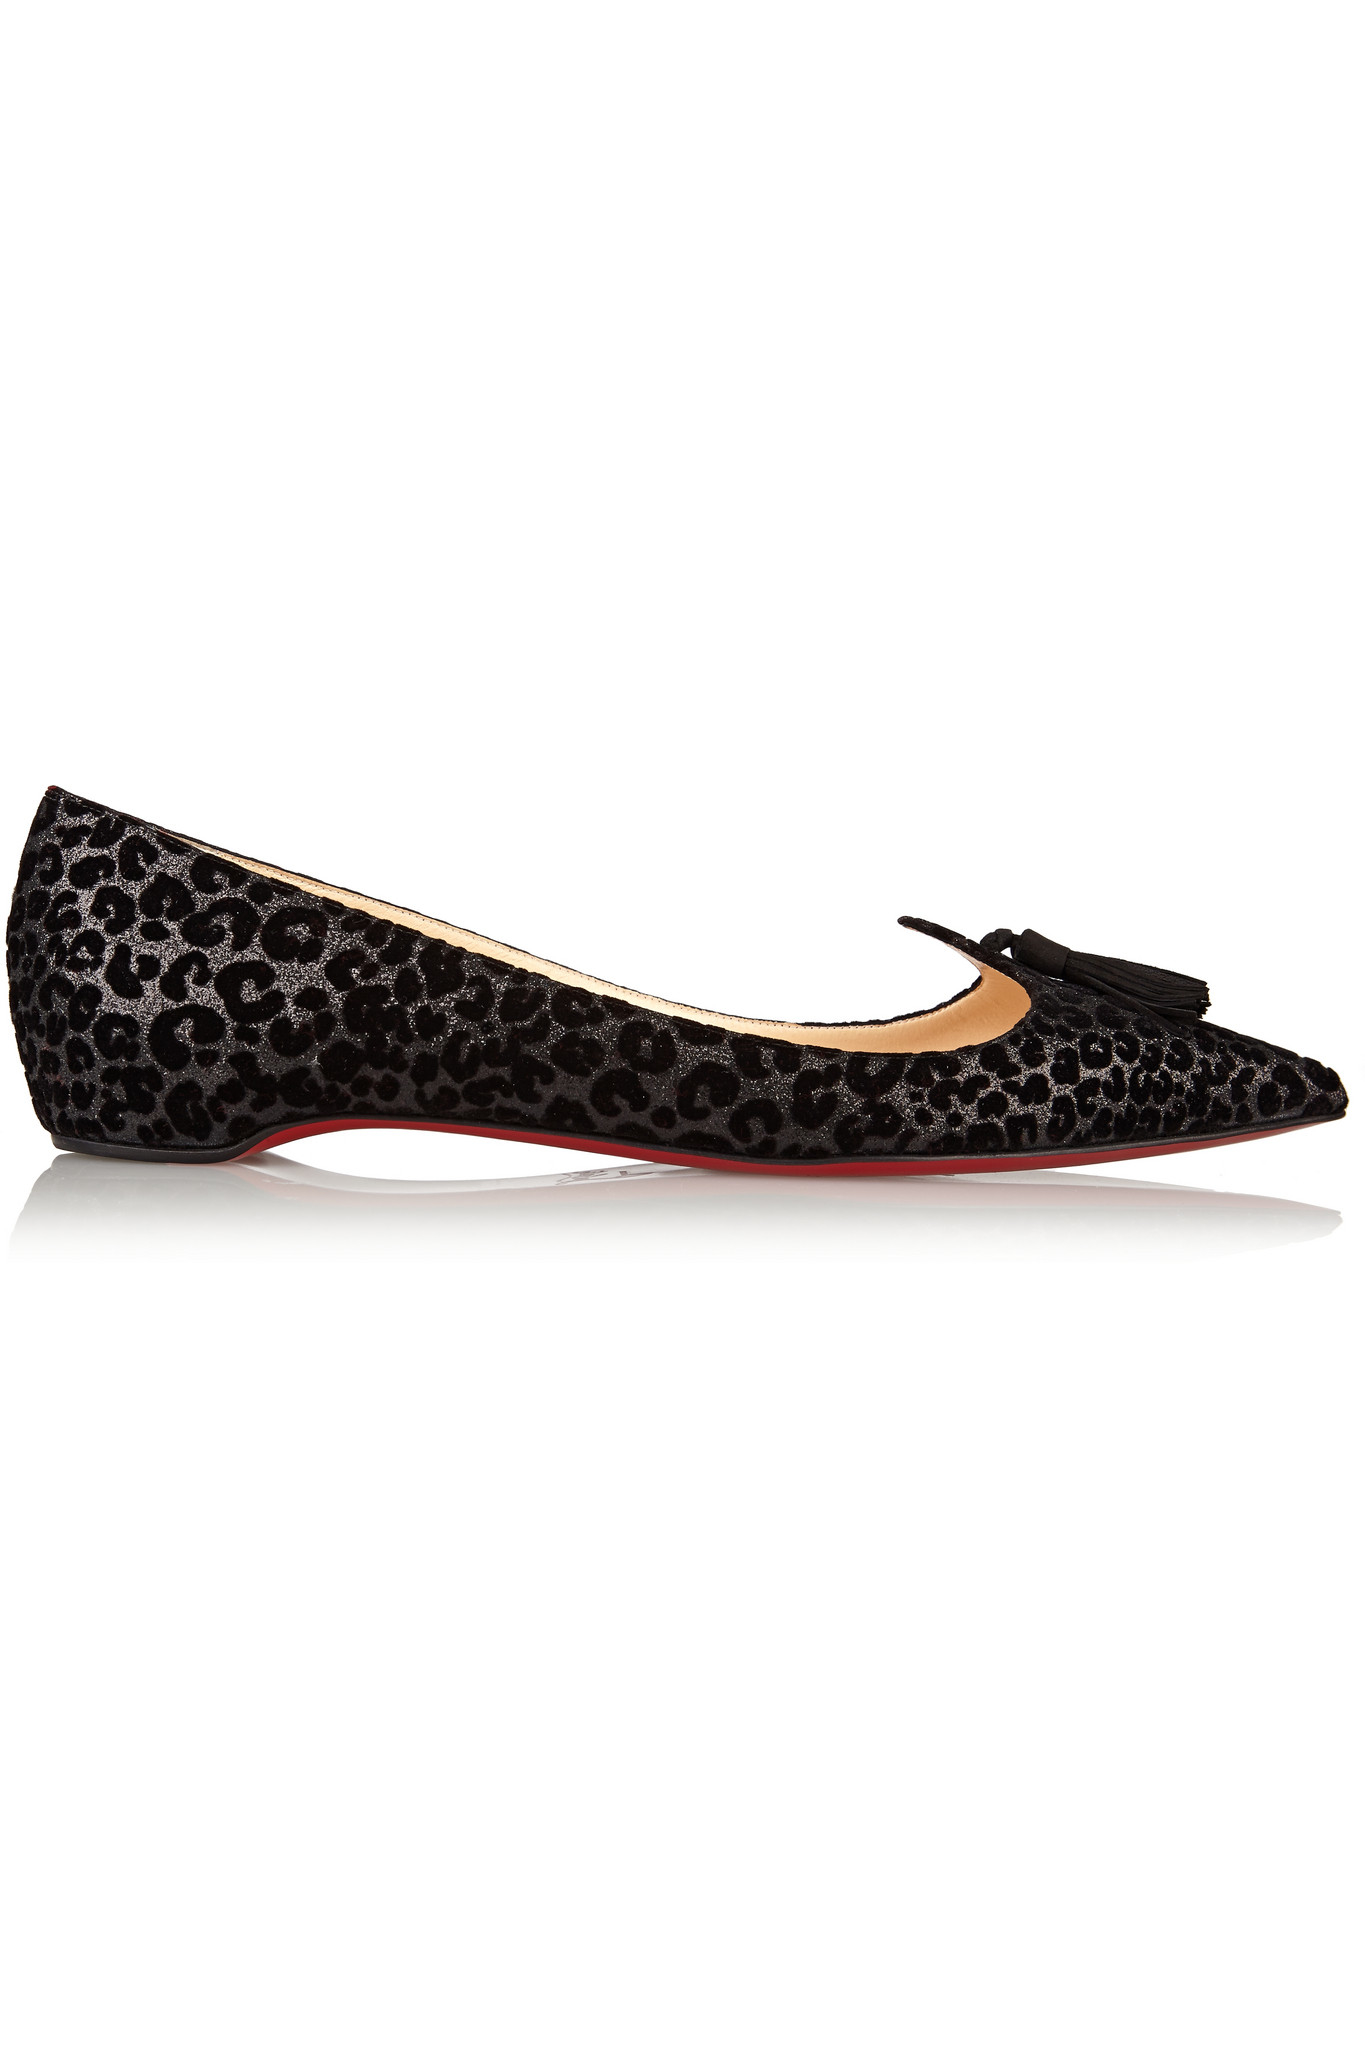 Lyst - Christian Louboutin Gwalior Flocked Glittered Leather Point-toe ...